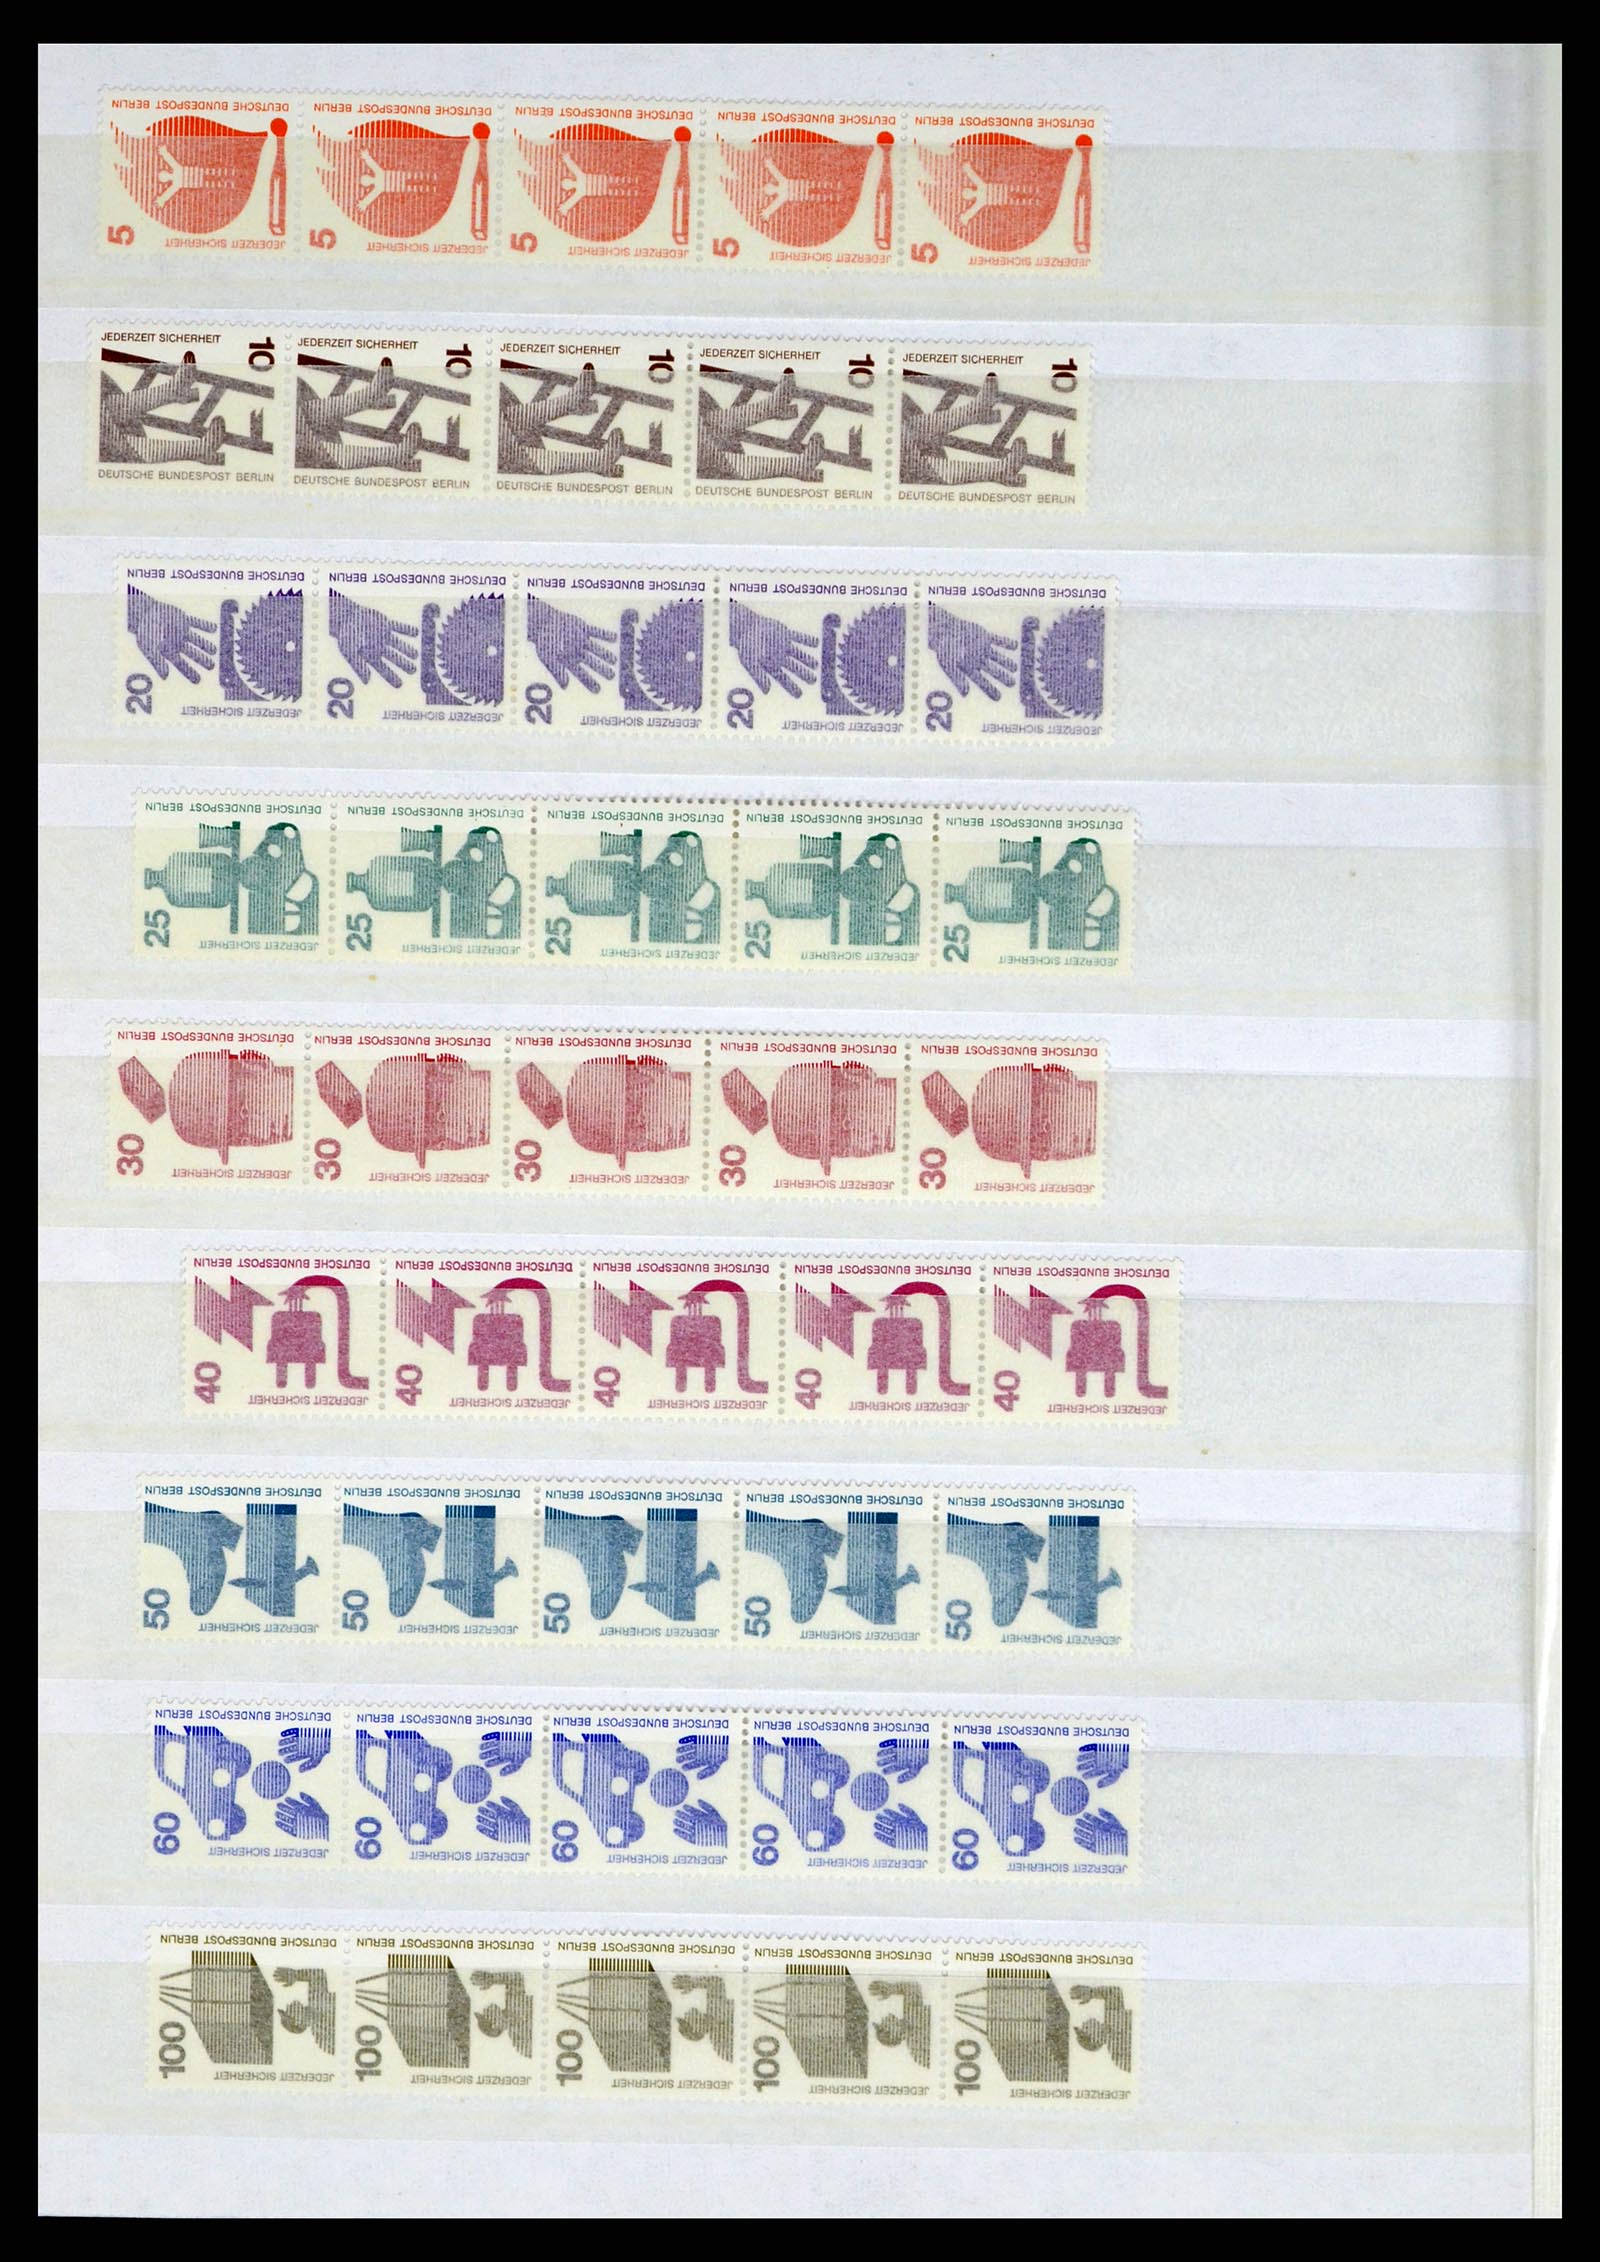 37354 095 - Stamp collection 37354 Bundespost and Berlin 1955-2000.